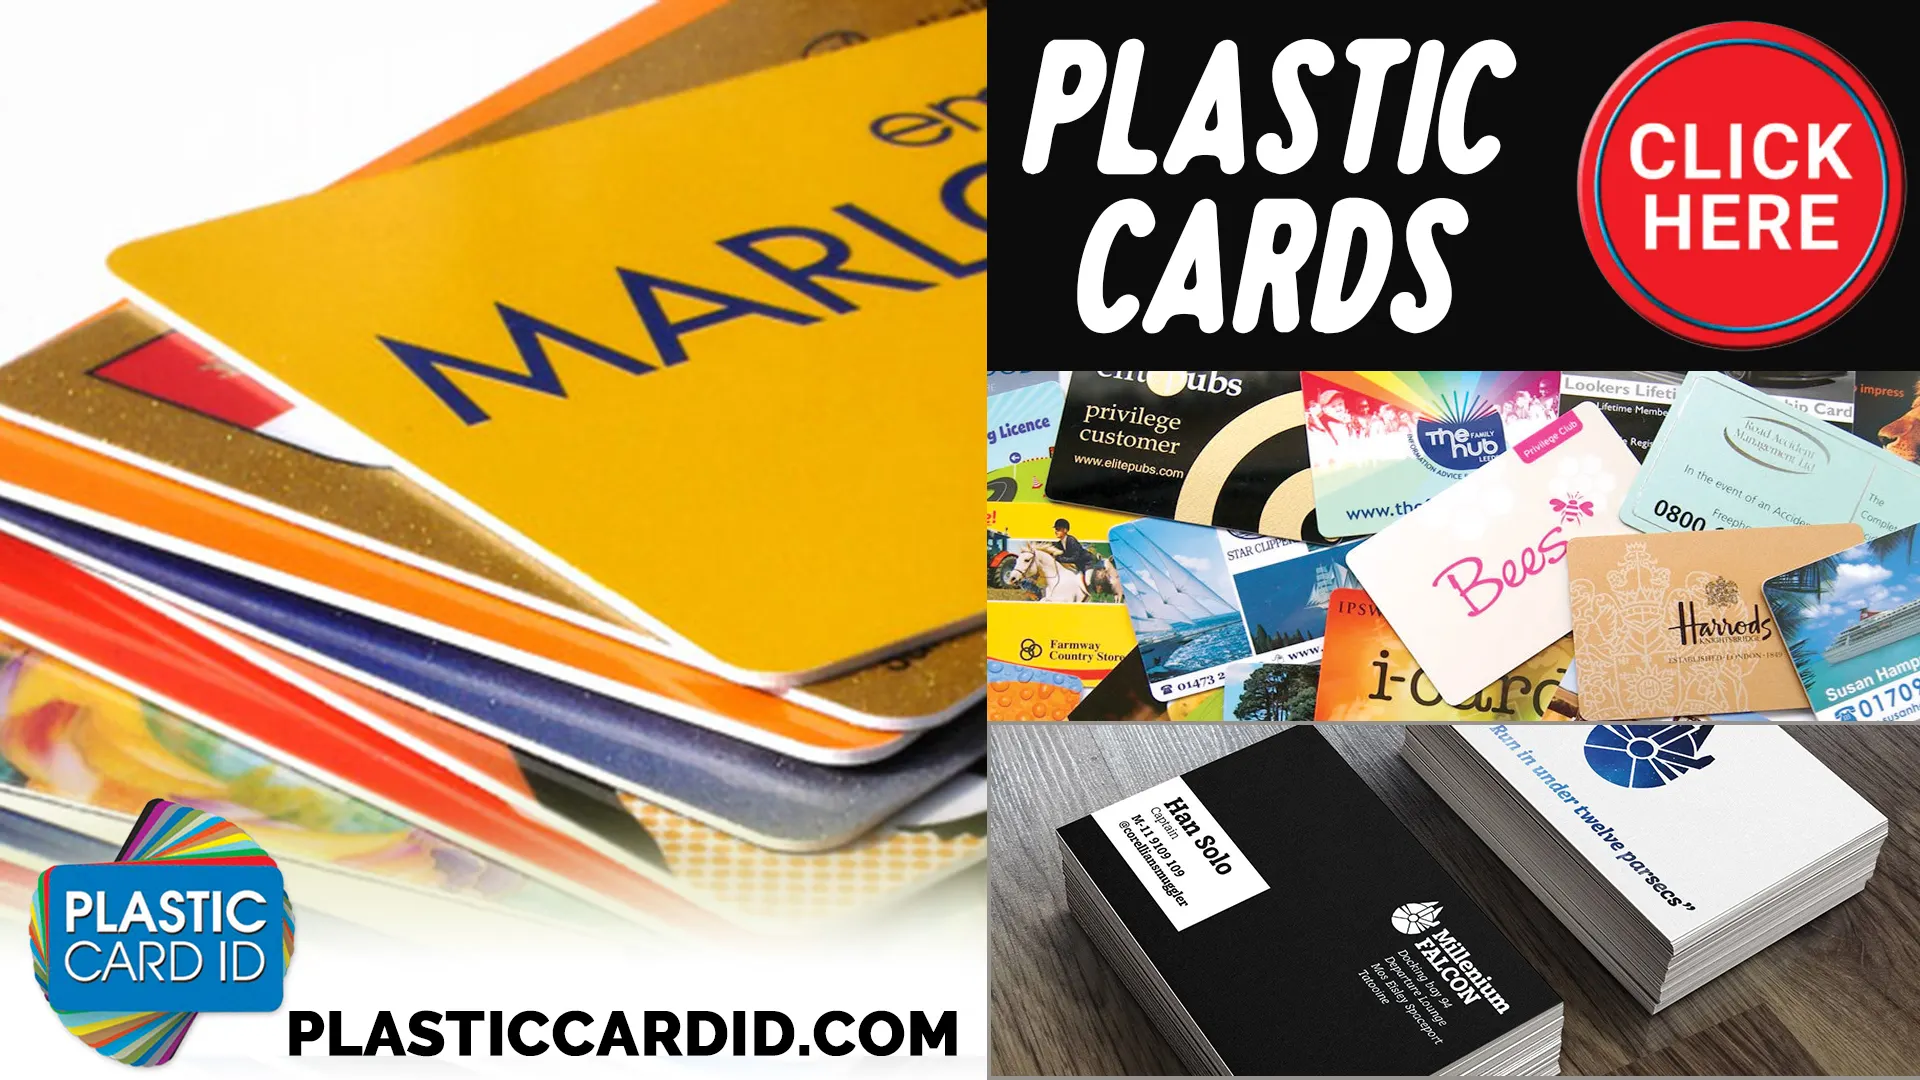 Unmatched Support and Expert Guidance from Plastic Card ID
